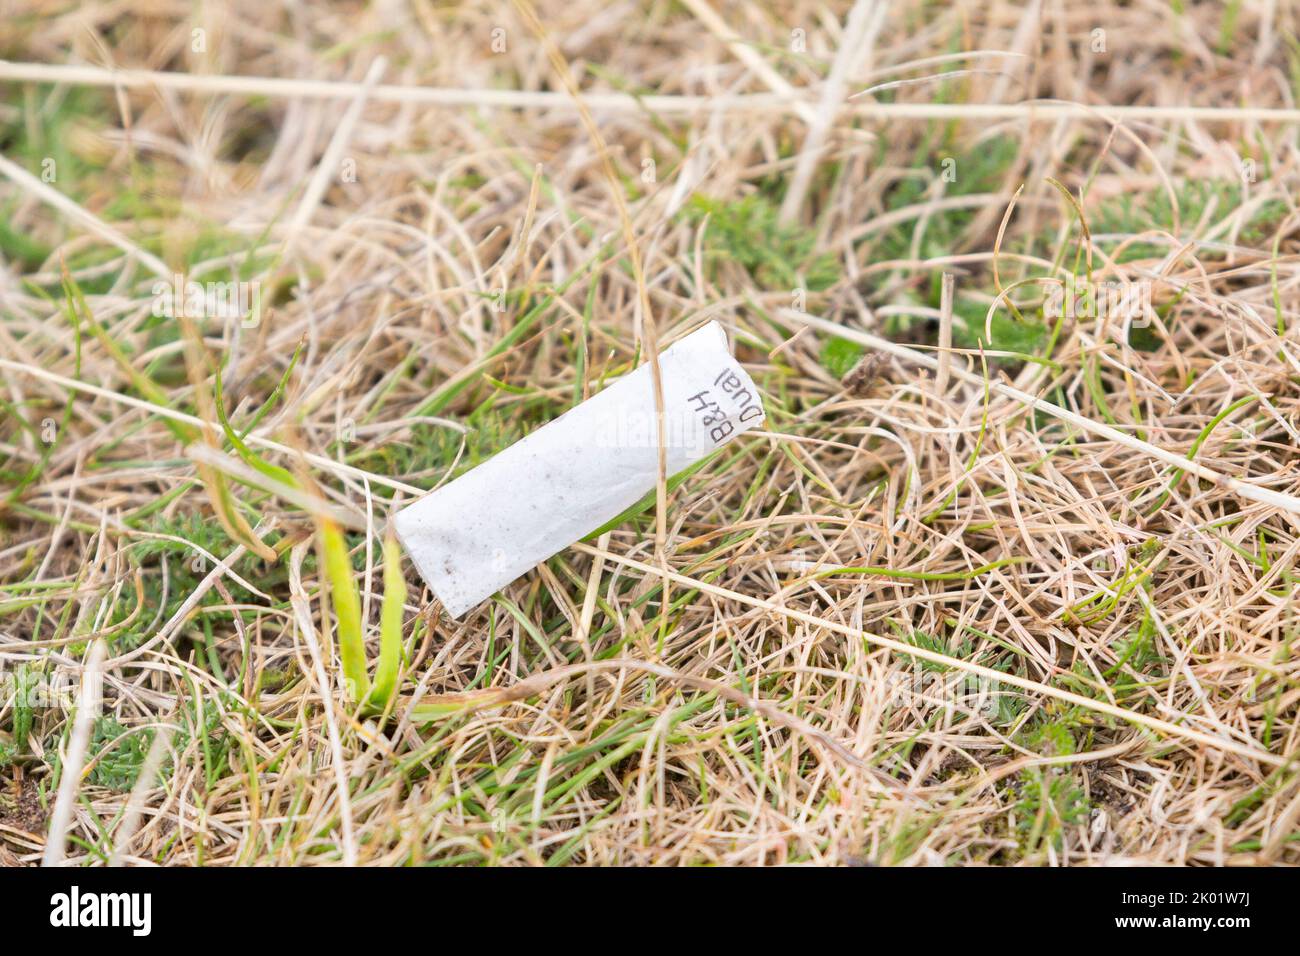 Discarded cigarette butt left on dry parched grassland in a UK park. Stock Photo